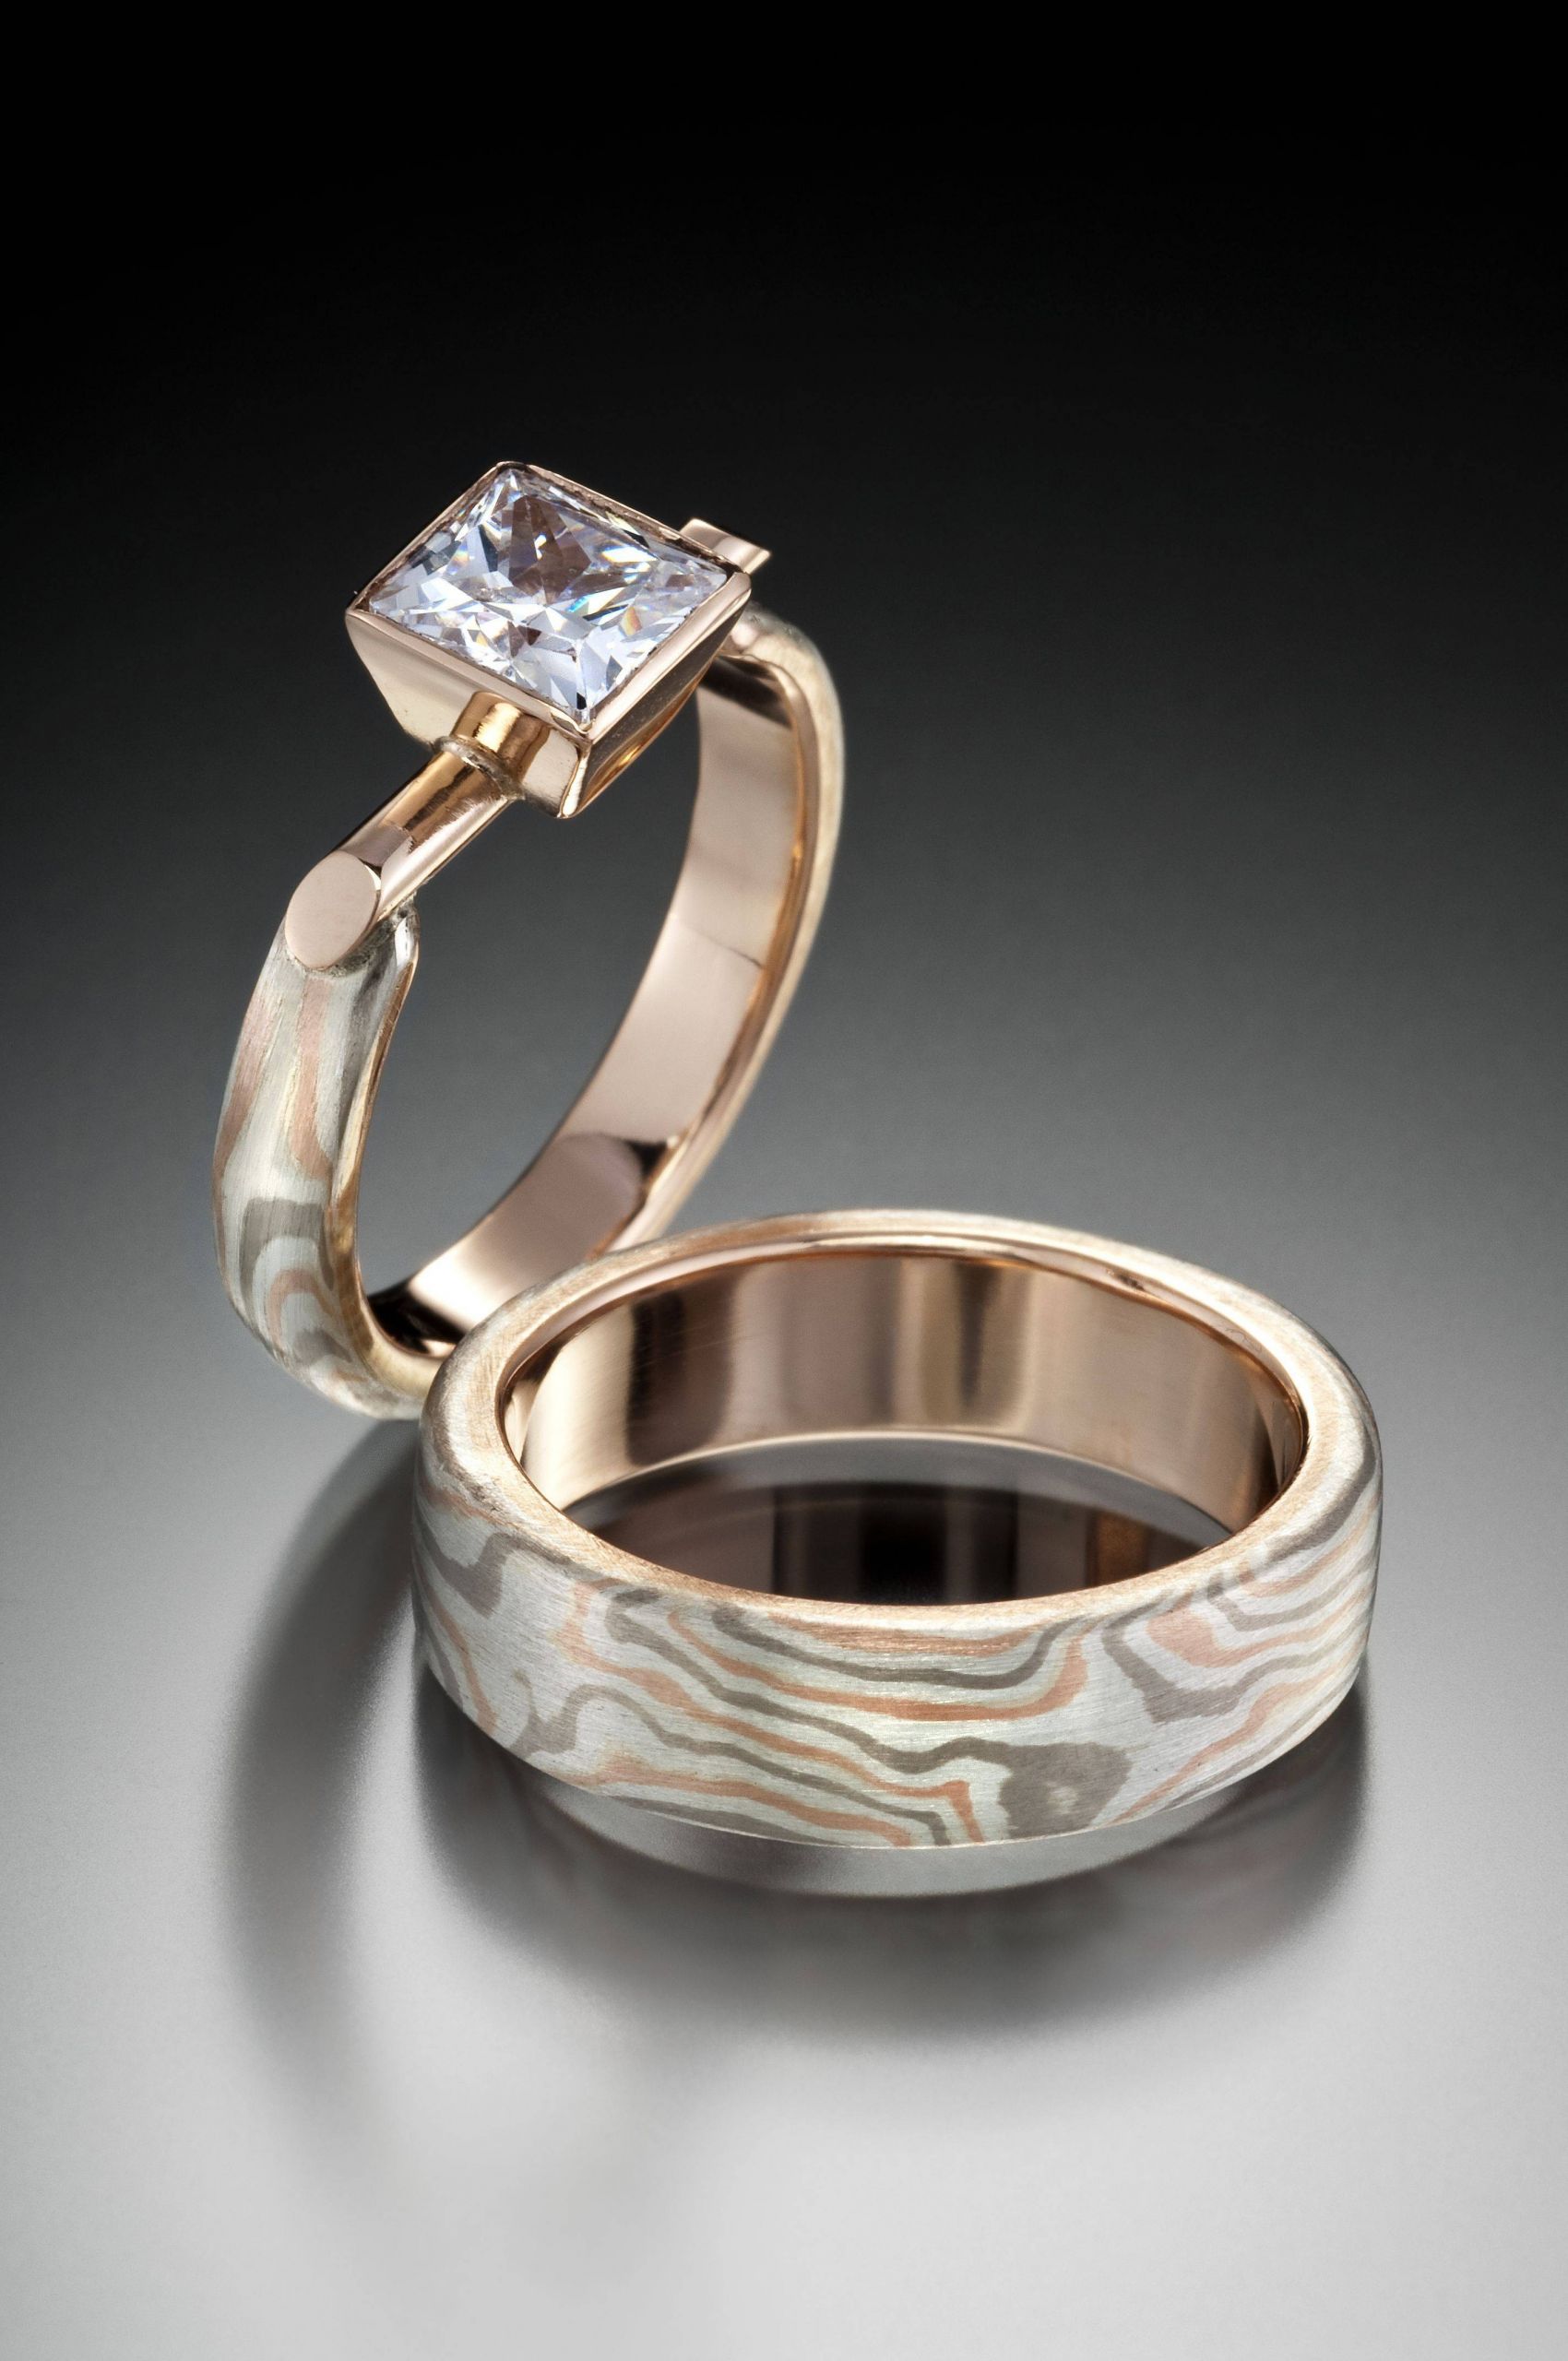 Contemporary Wedding Rings
 15 Inspirations of Contemporary Wedding Rings